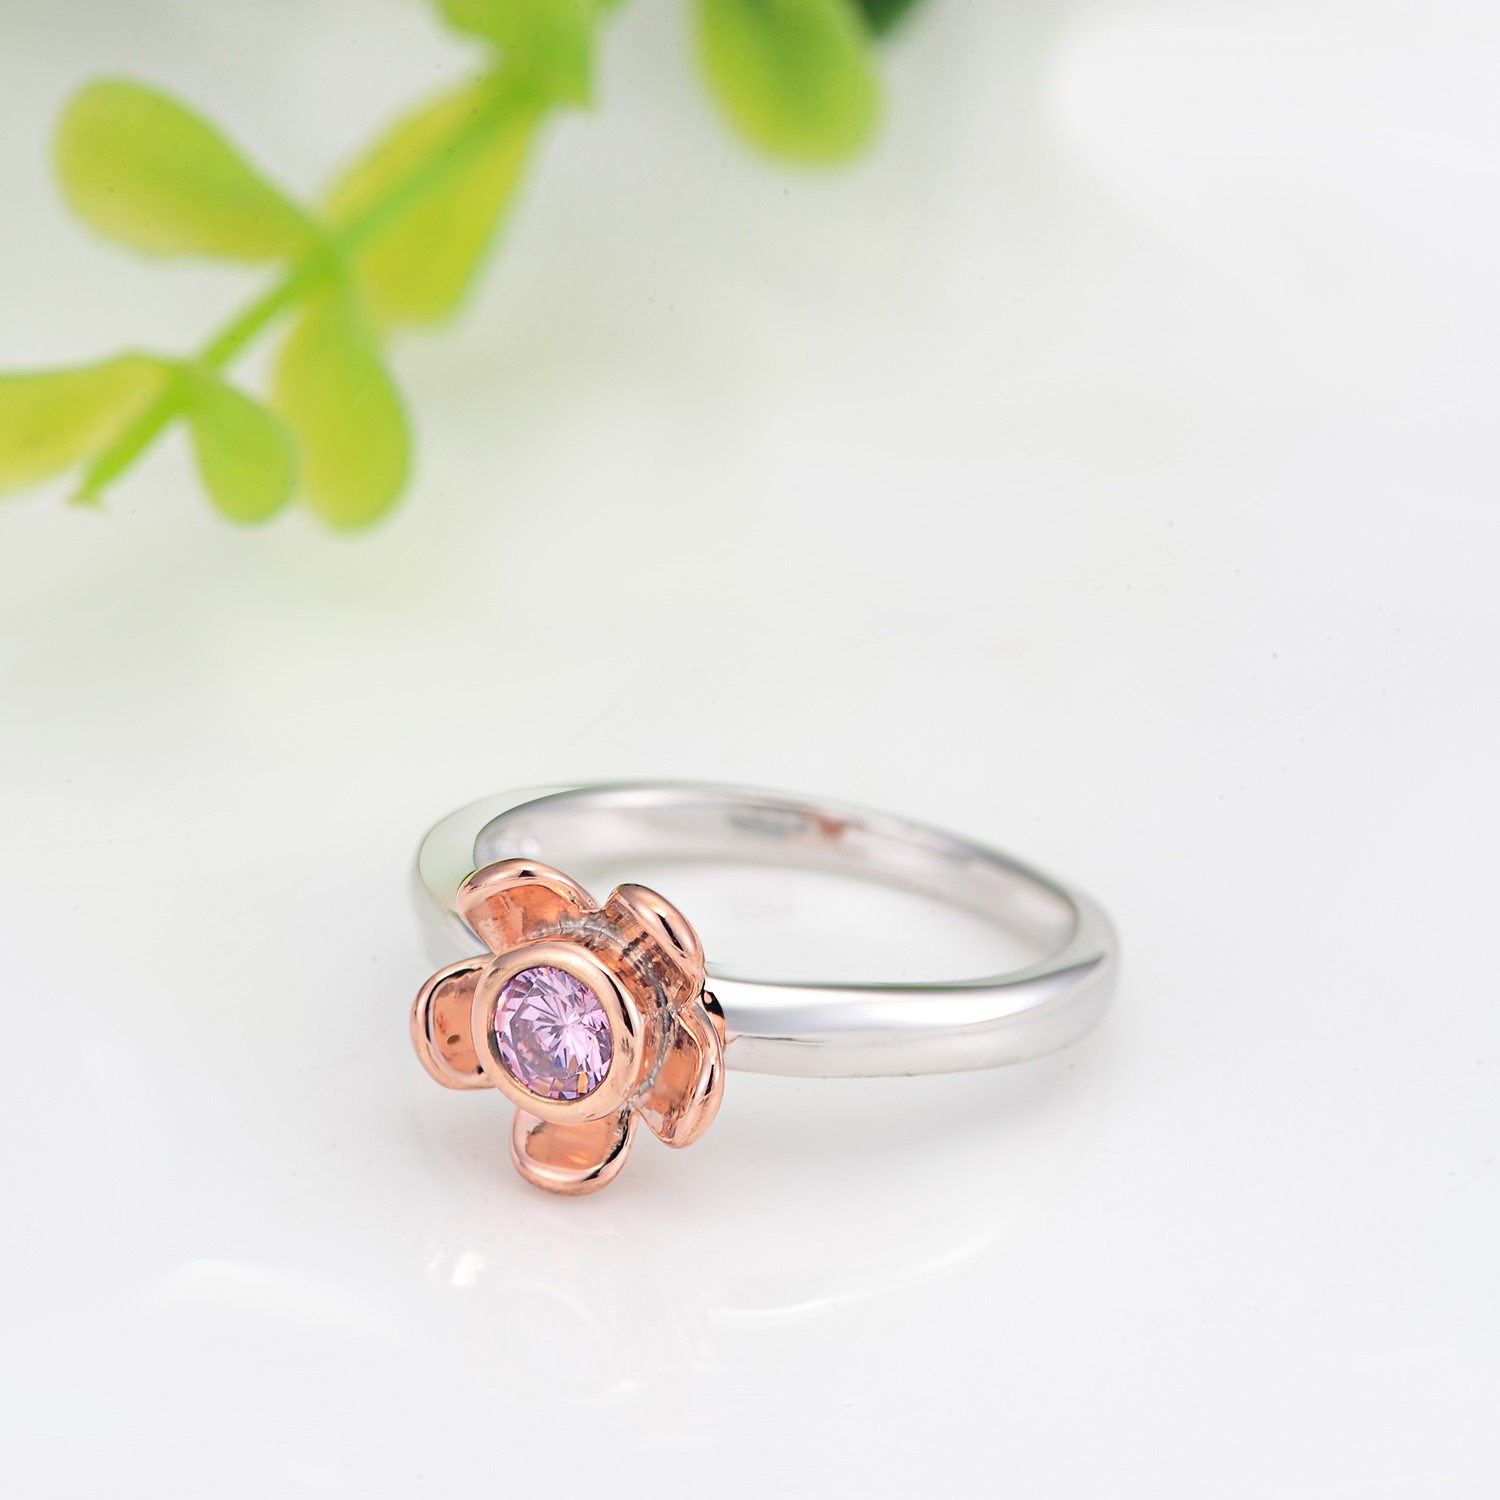 Red Rose Garden Flower Leaves Silver Cut Finger Rings Valentines Day Gift Jewelry Hot Sale Rings(图2)